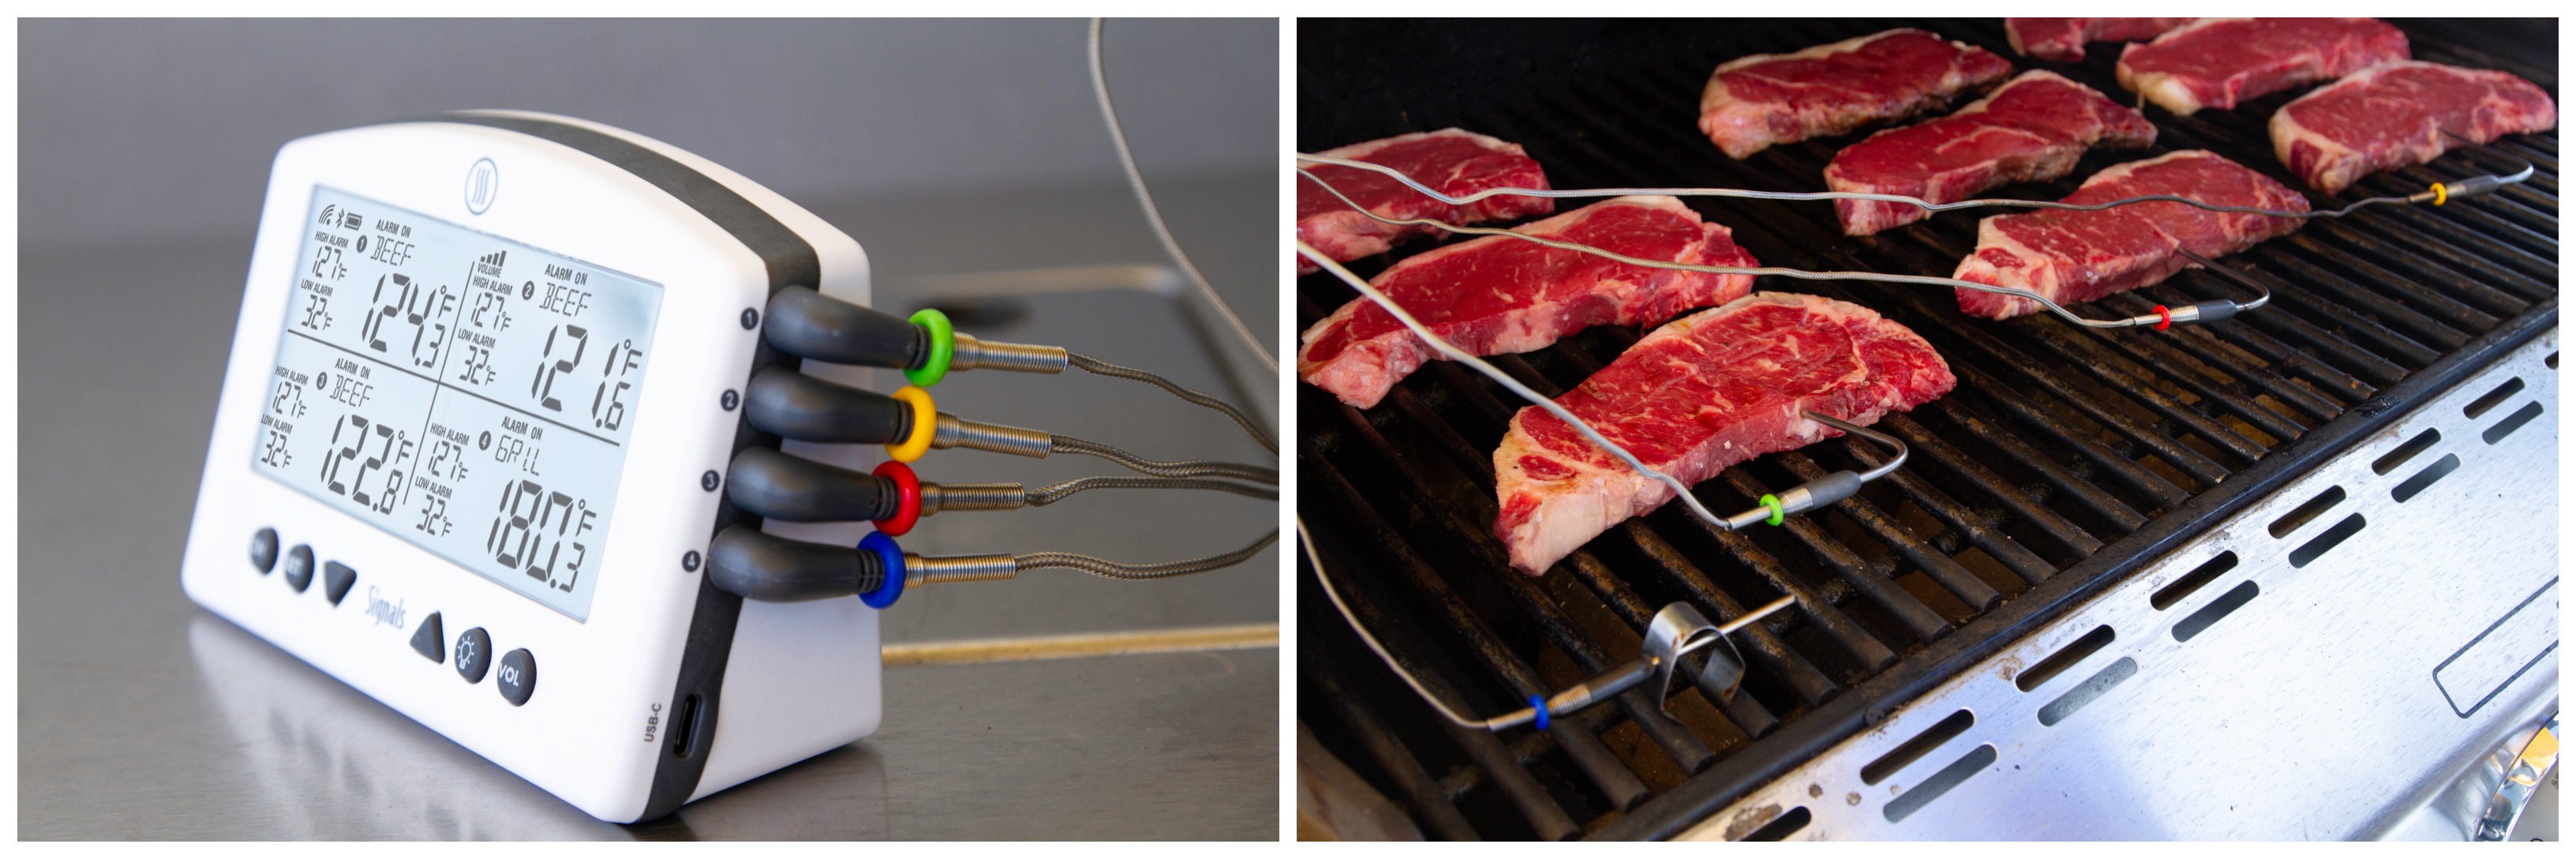 https://blog.thermoworks.com/wp-content/uploads/2018/10/Keep-the-cables-off-the-grill.jpg